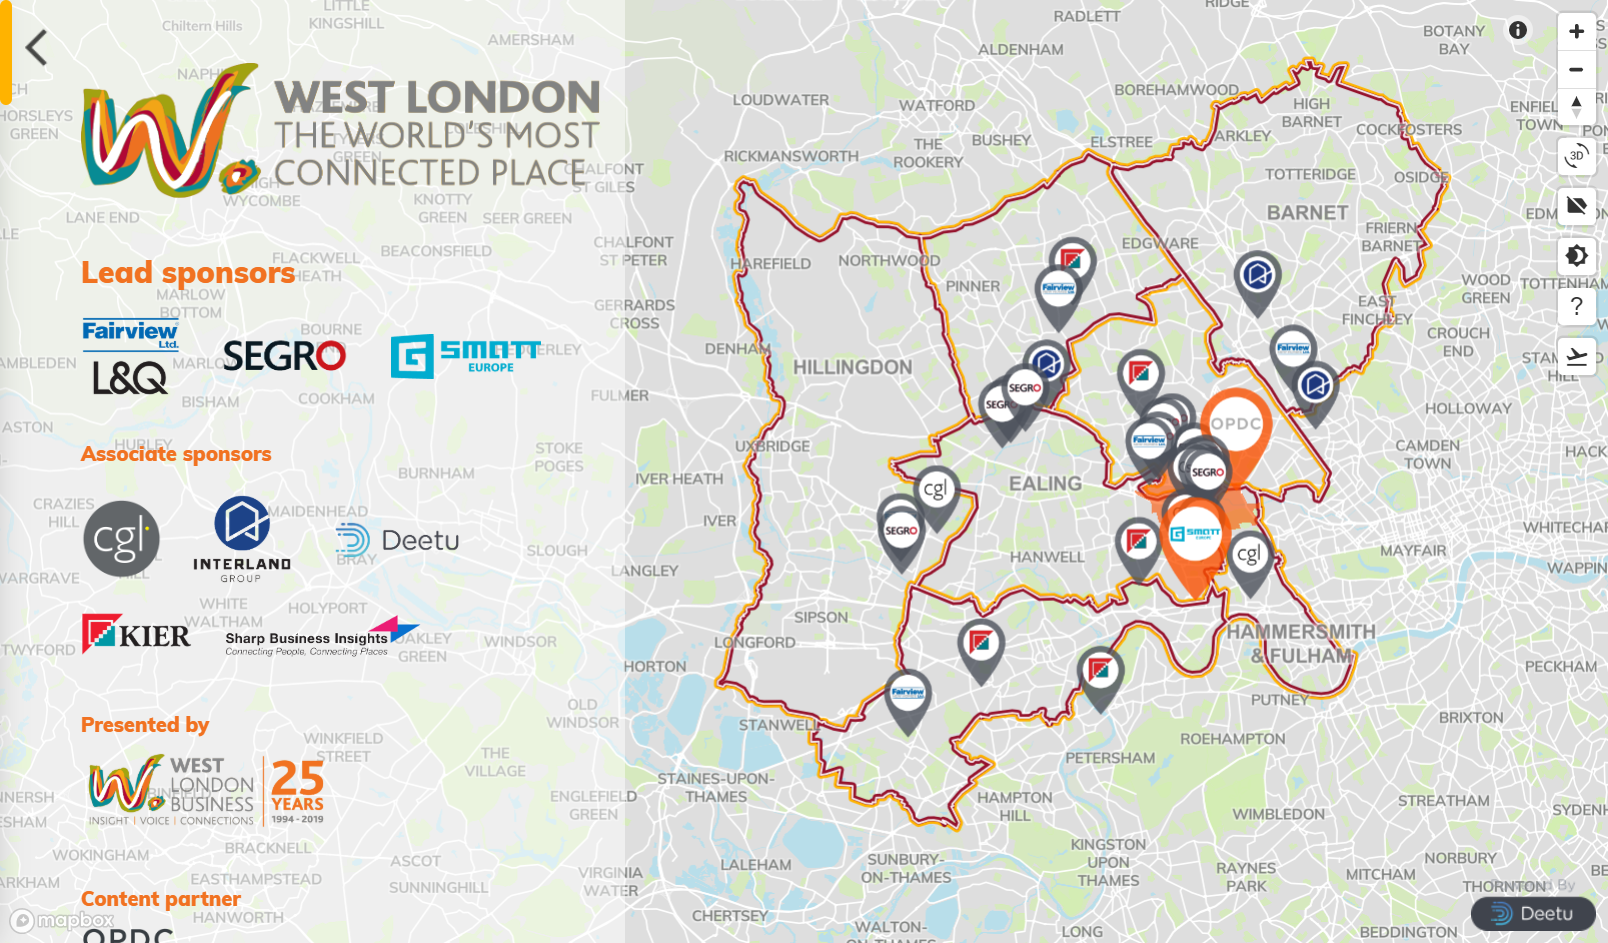 Screenshot of the Explore West London map